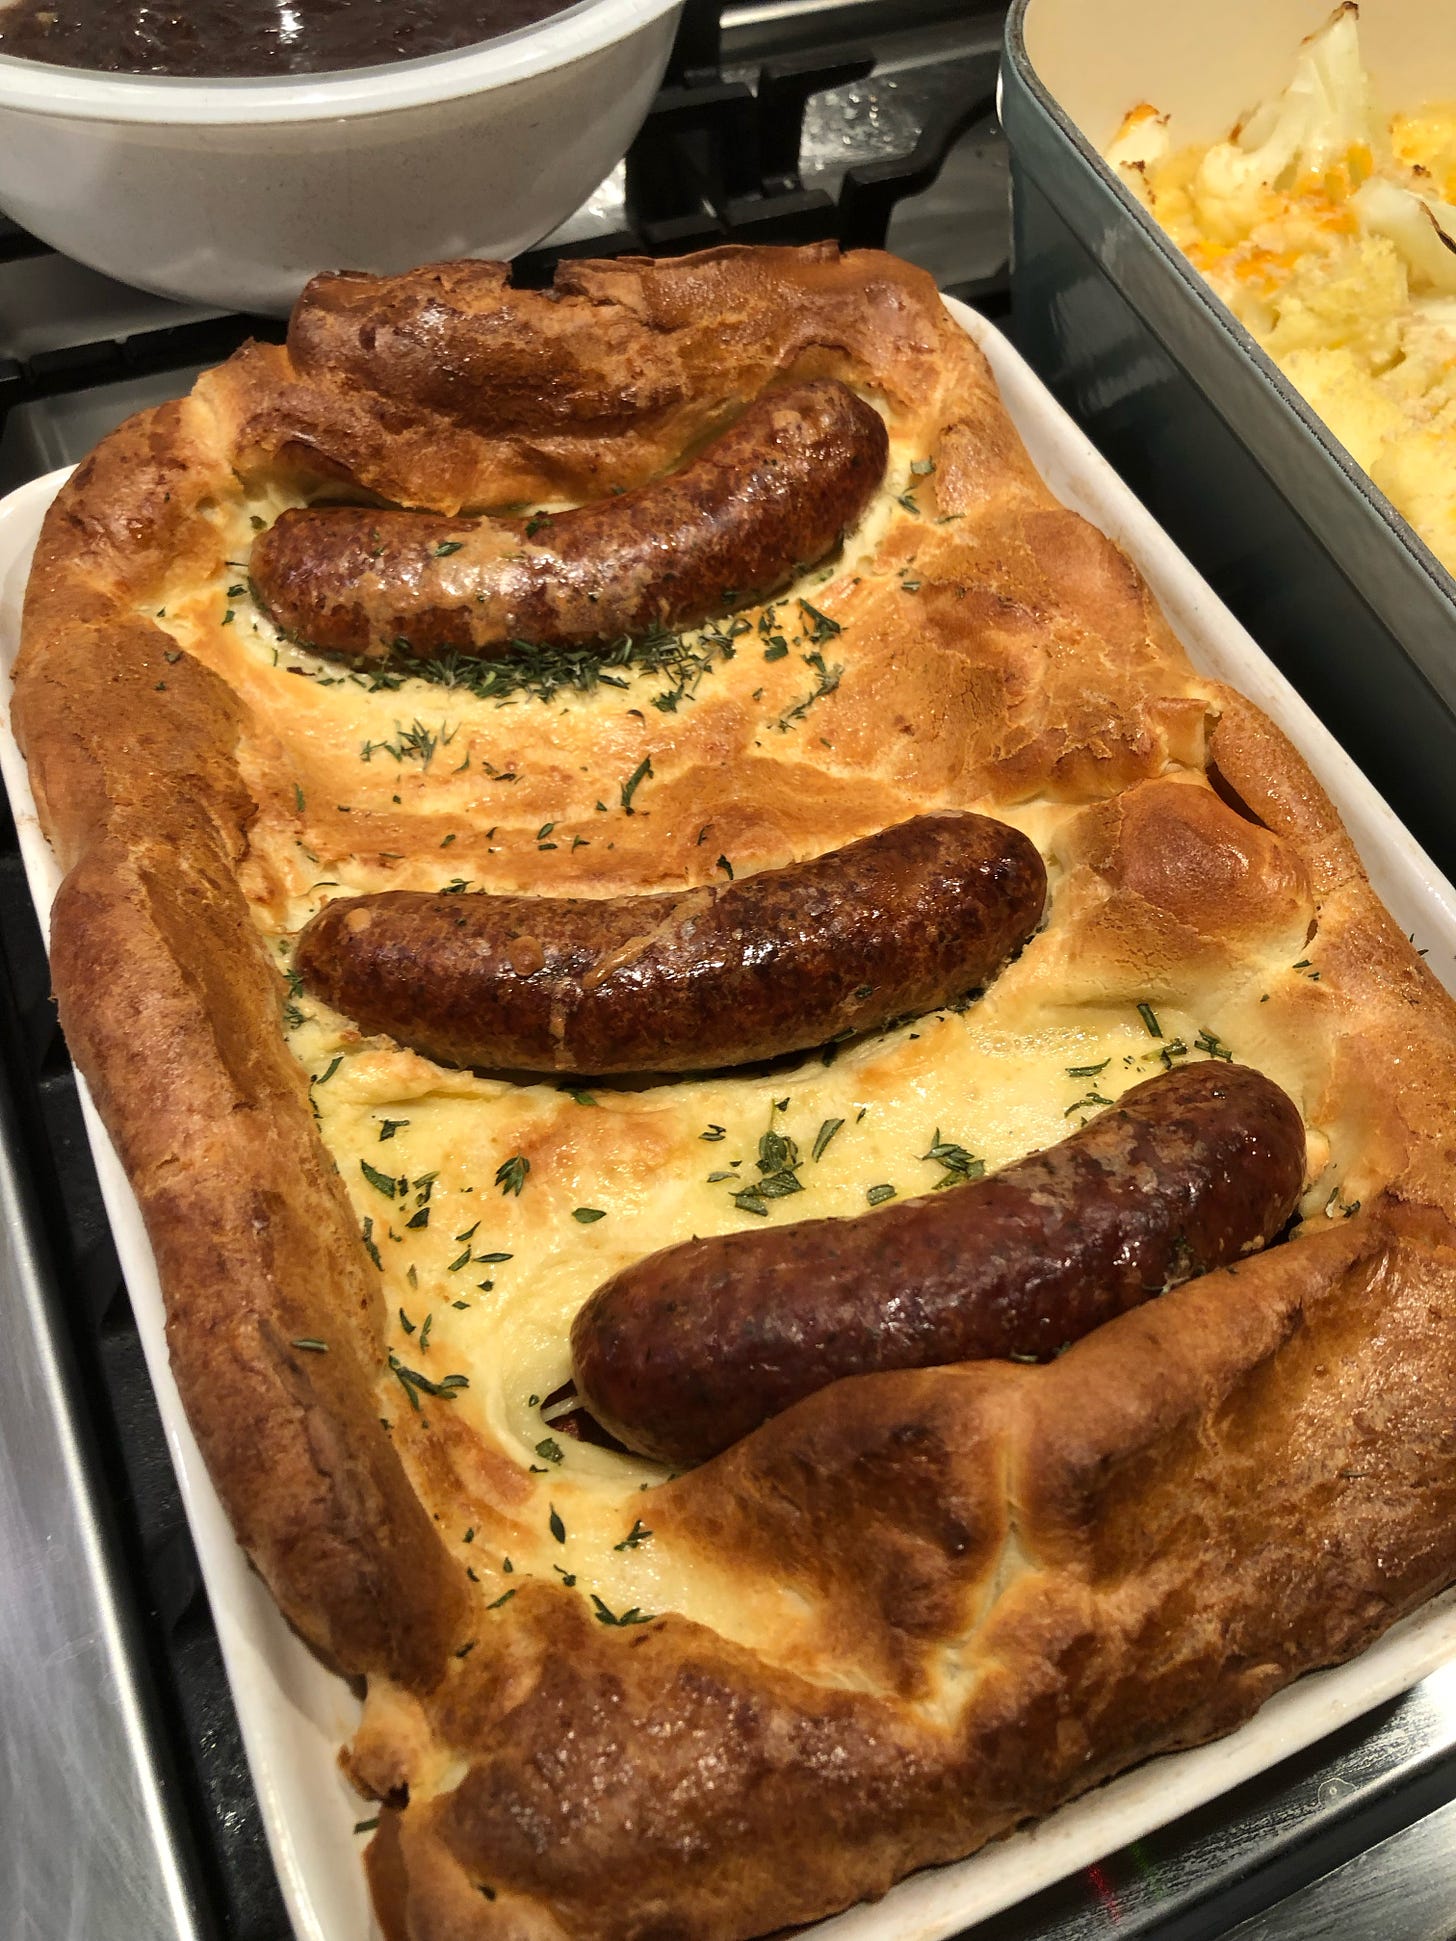 A fully-baked Toad in the Hole, sausages surrounded by puffy, browned Yorkshire pudding